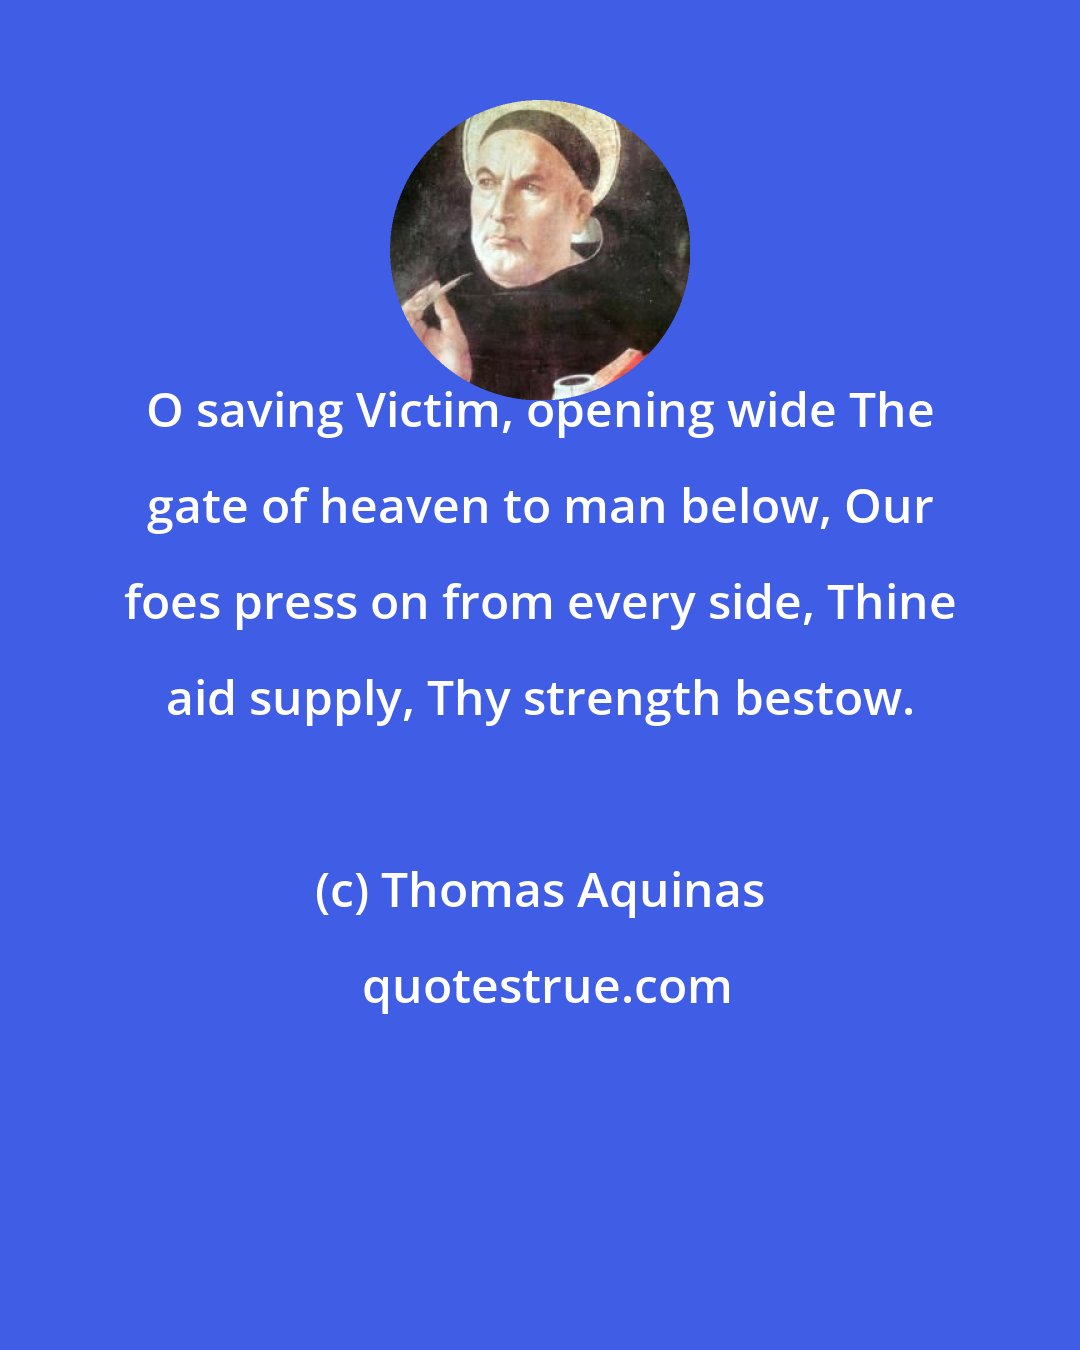 Thomas Aquinas: O saving Victim, opening wide The gate of heaven to man below, Our foes press on from every side, Thine aid supply, Thy strength bestow.